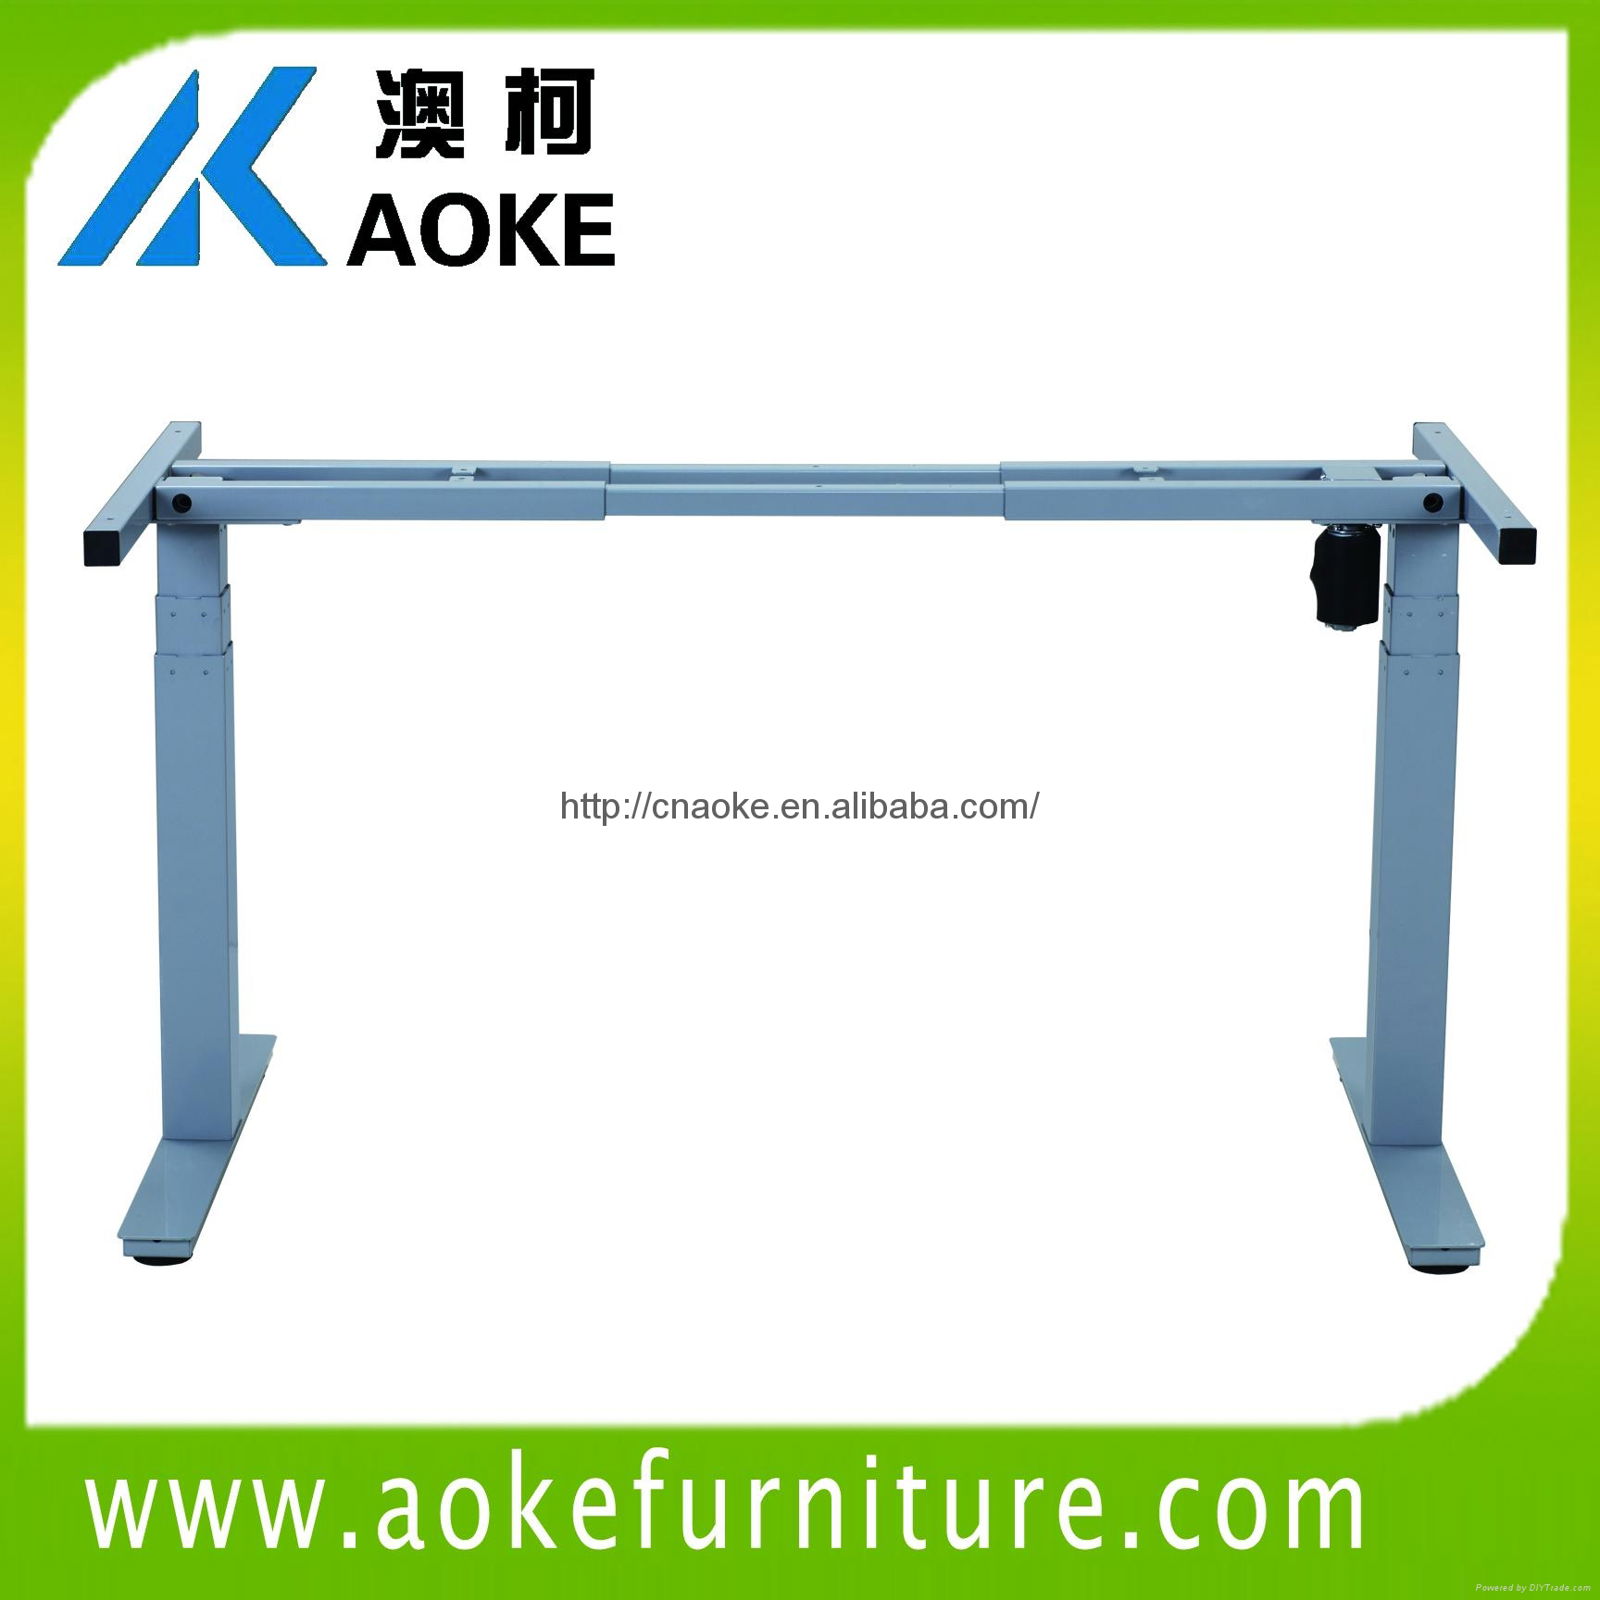 AOKE AK02ES-A-F motorized up and down standing table 4